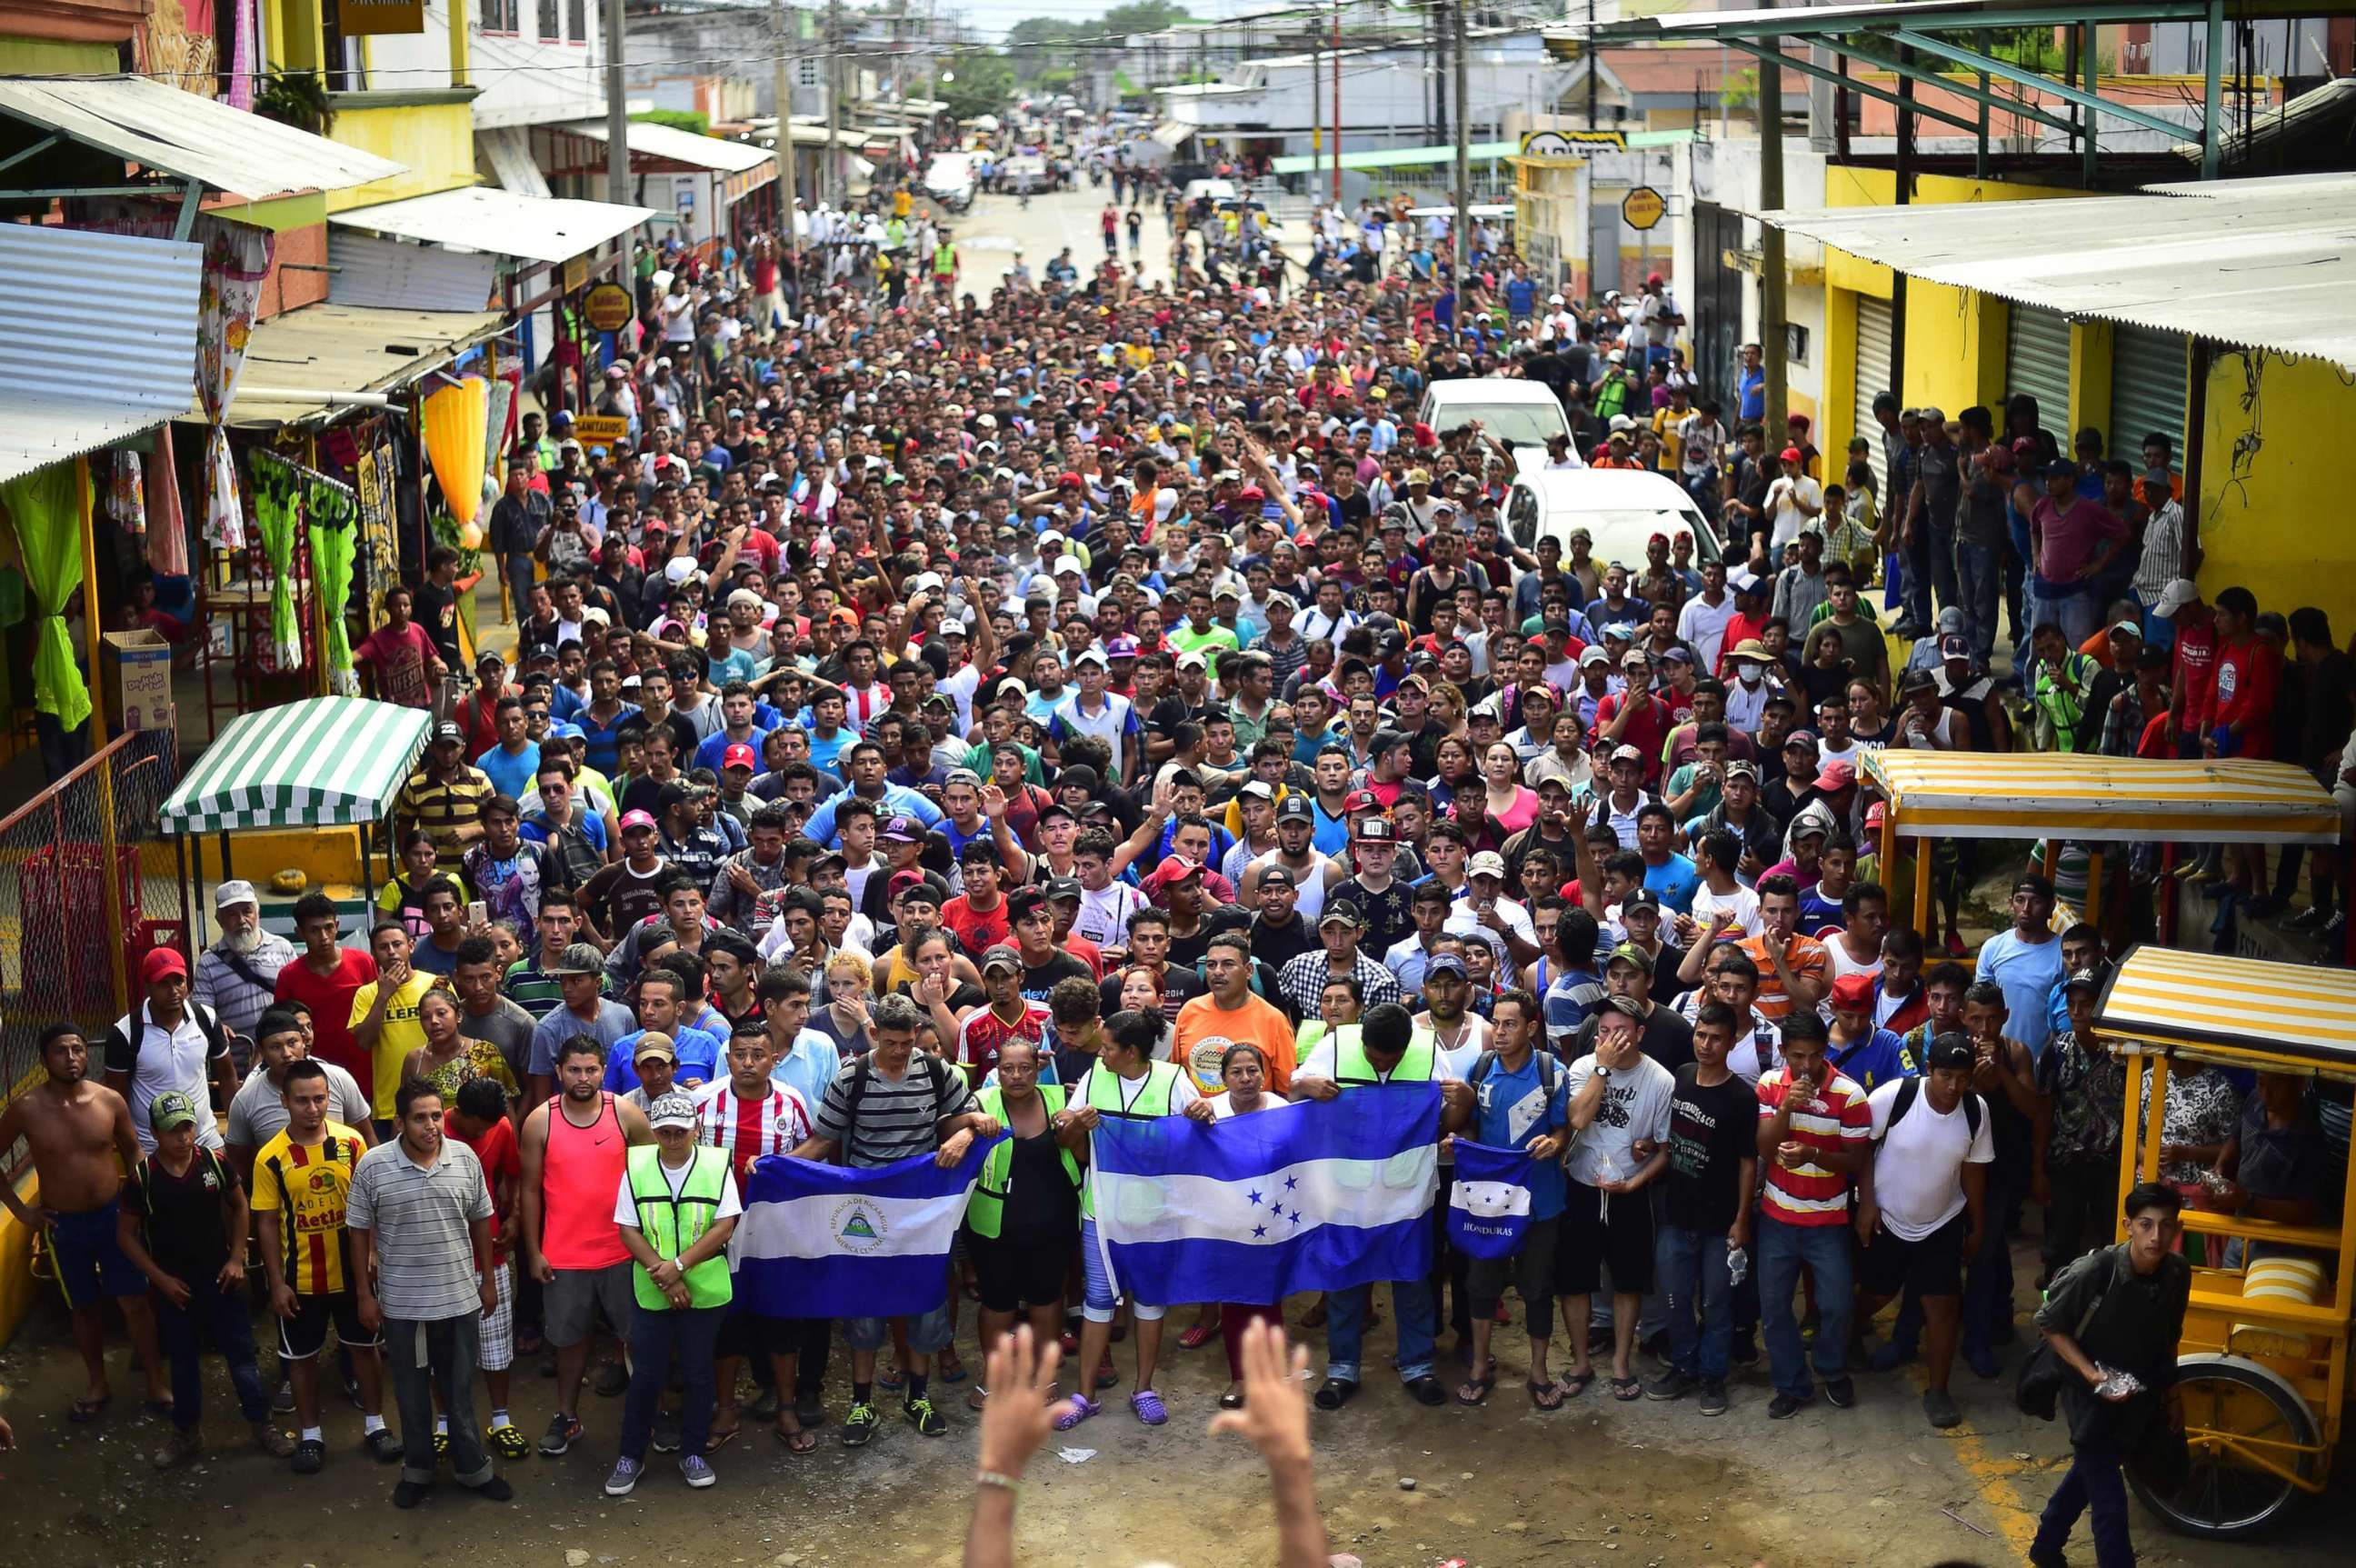 PHOTO: Honduran migrants heading in a caravan to the U.S., hold a demonstration demanding authorities to allow the rest of the group to cross, in Ciudad Hidalgo, Chiapas, Mexico after crossing from Guatemala, on Oct. 20, 2018.